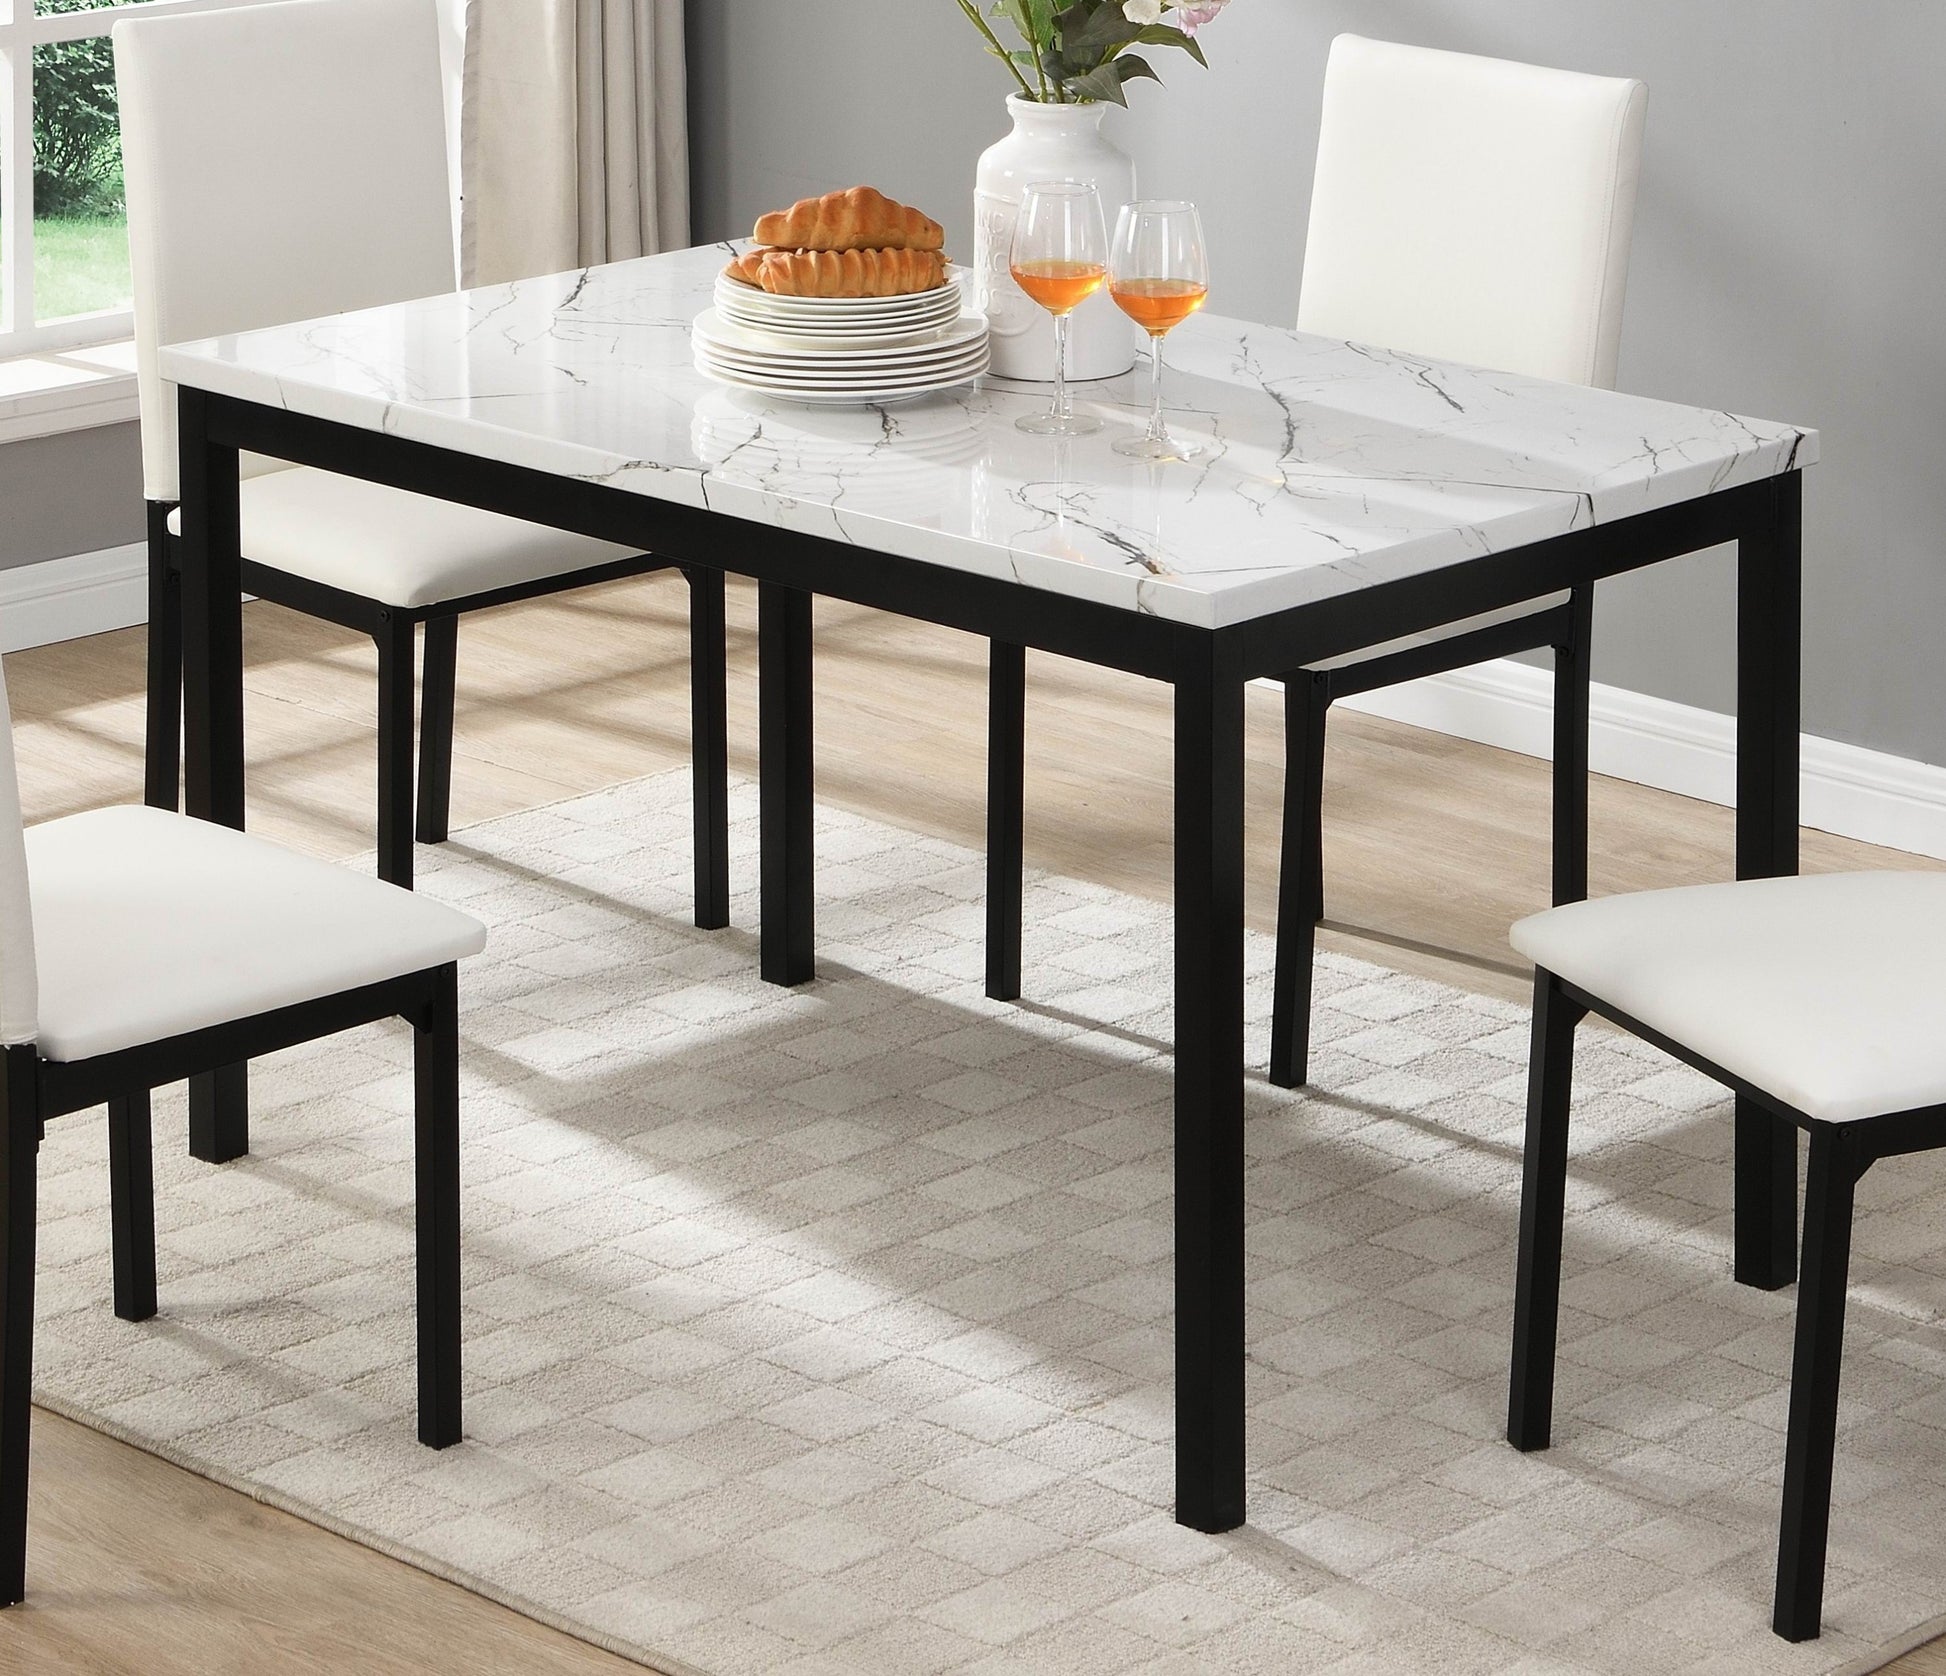 Dining 5pc Set White Faux Marble Top Table and 4x Side Chais Metal Frame Black Casual Dining Furniture - Enova Luxe Home Store